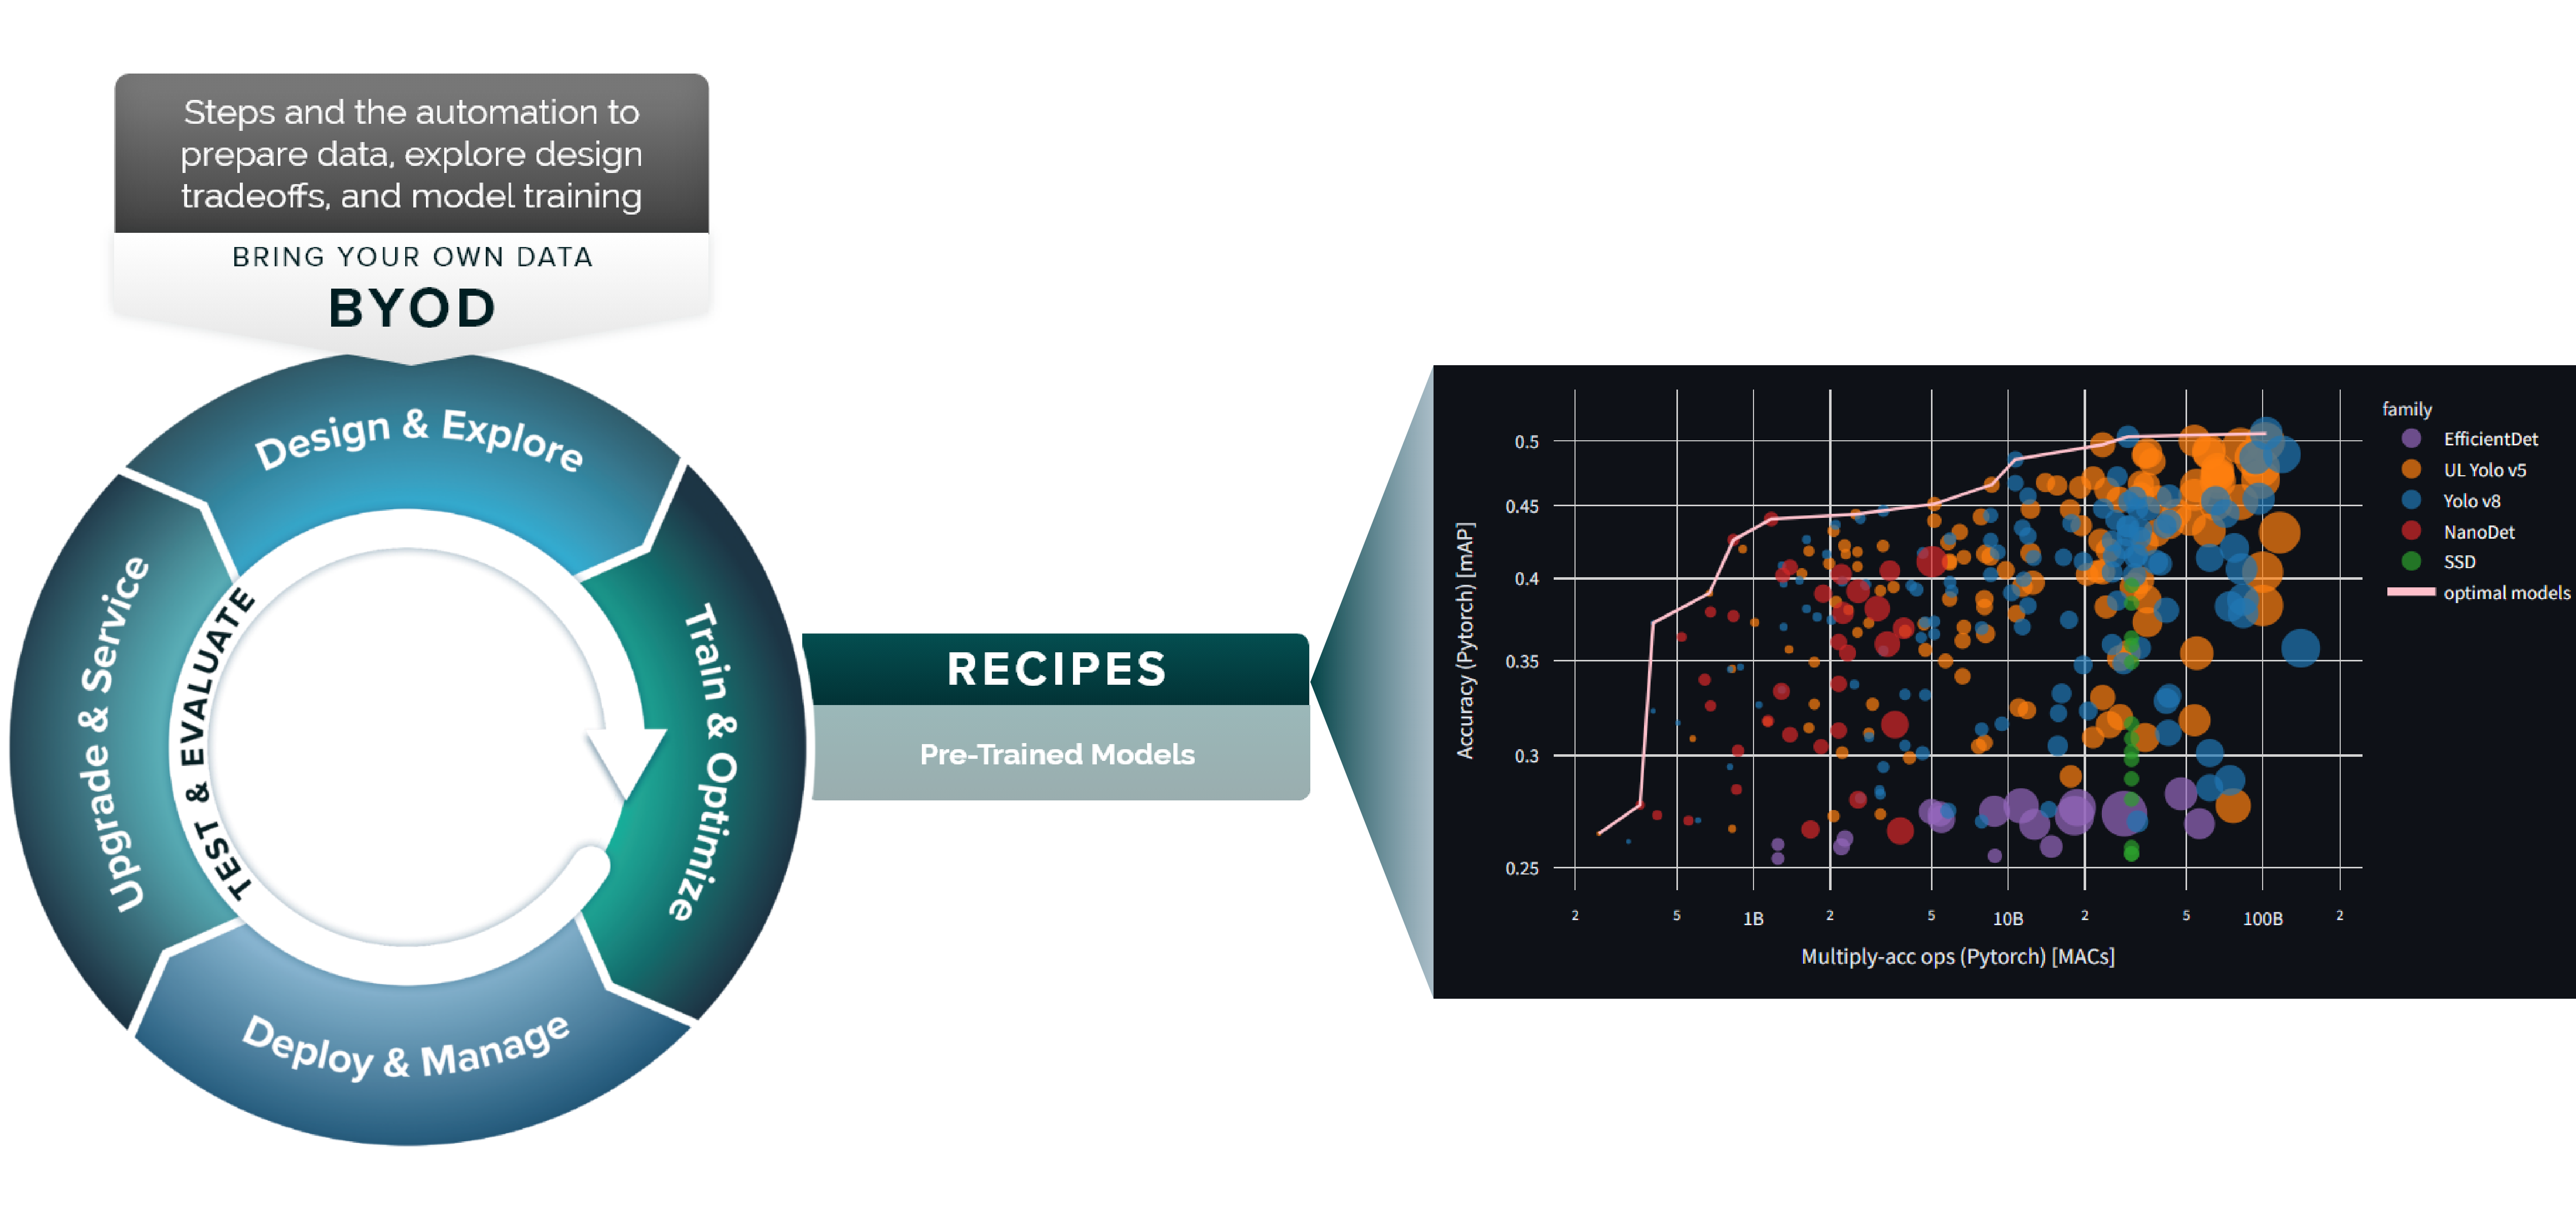 LEIP Recipes, a rapidly growing library of over 50,000 pre-qualified model configurations lets you quickly compare performance across different hardware targets to find the best combination of models and hardware for your data.